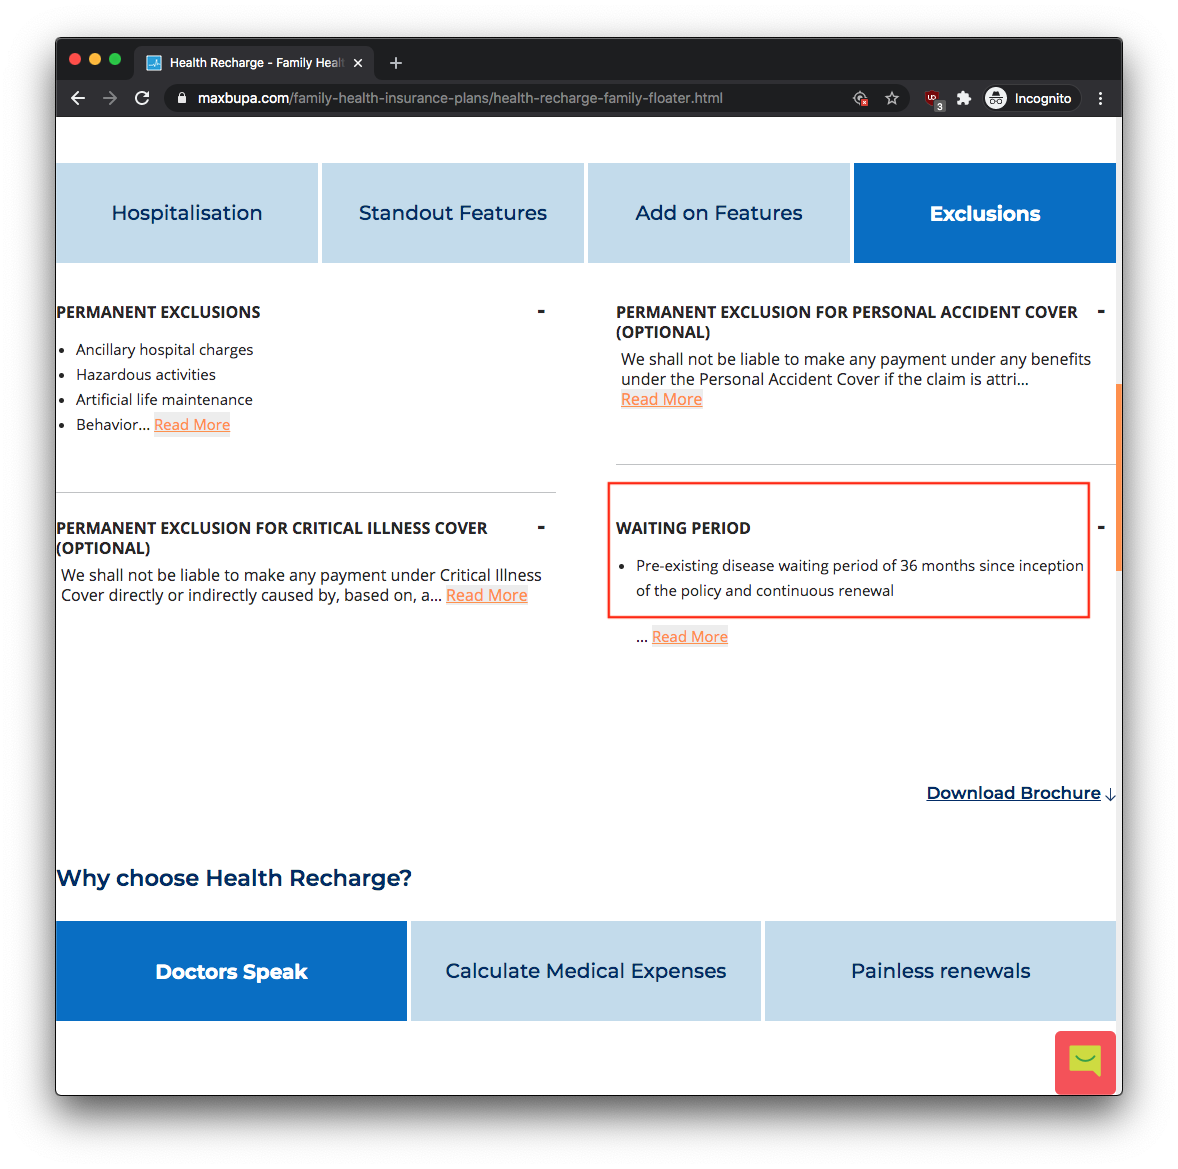 Max Bupa health insurance website showing exclusions and waiting period